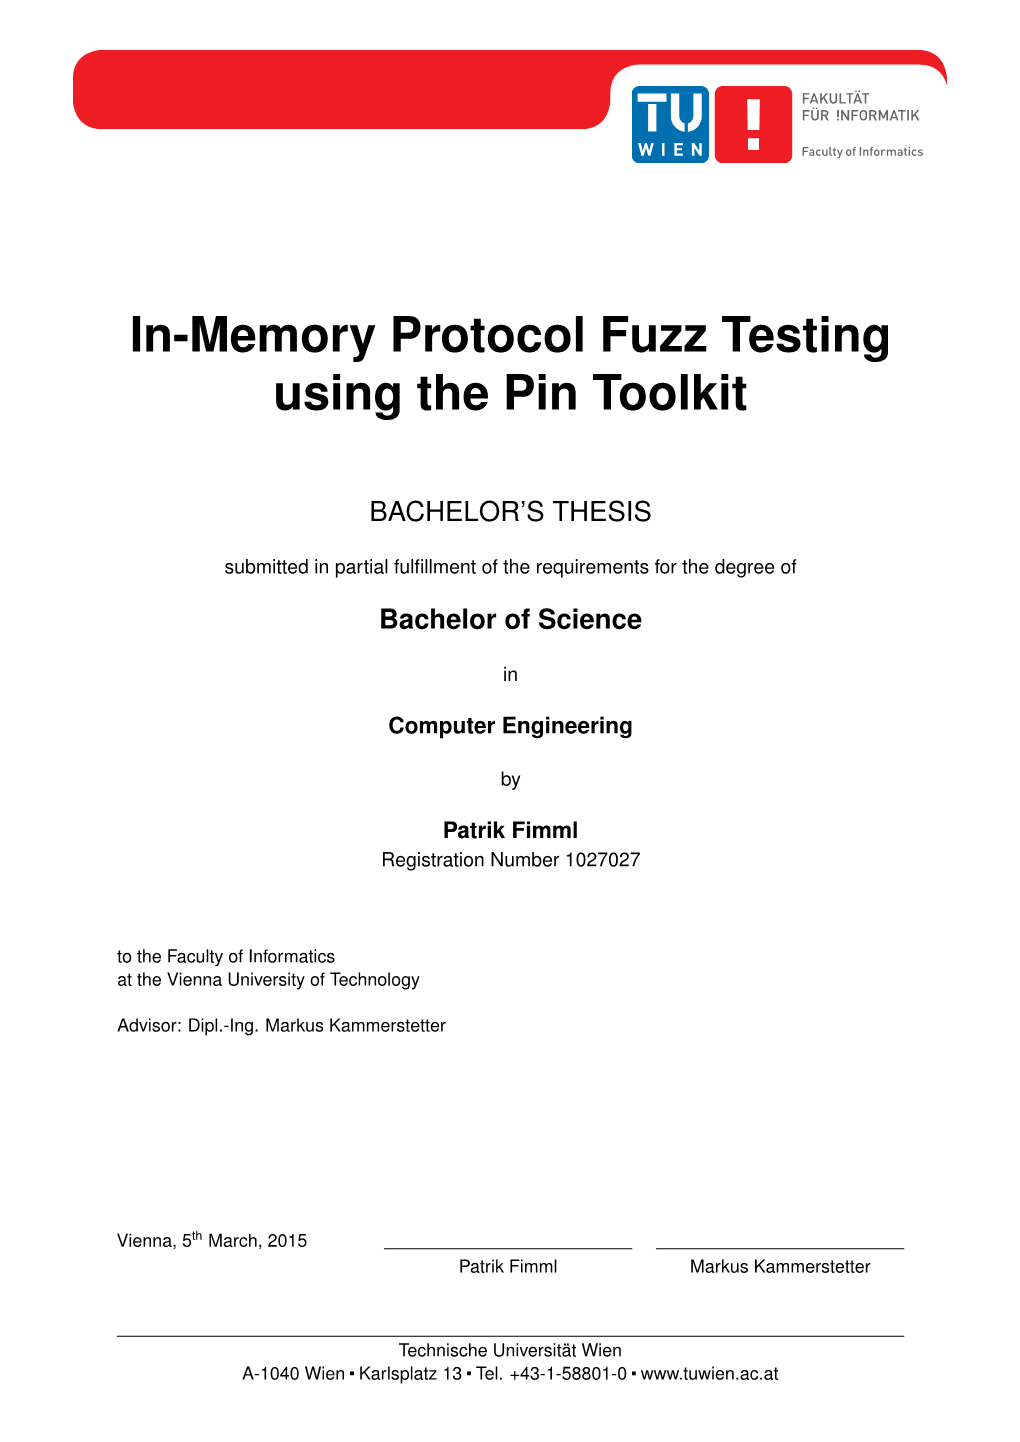 In-Memory Protocol Fuzz Testing Using the Pin Toolkit